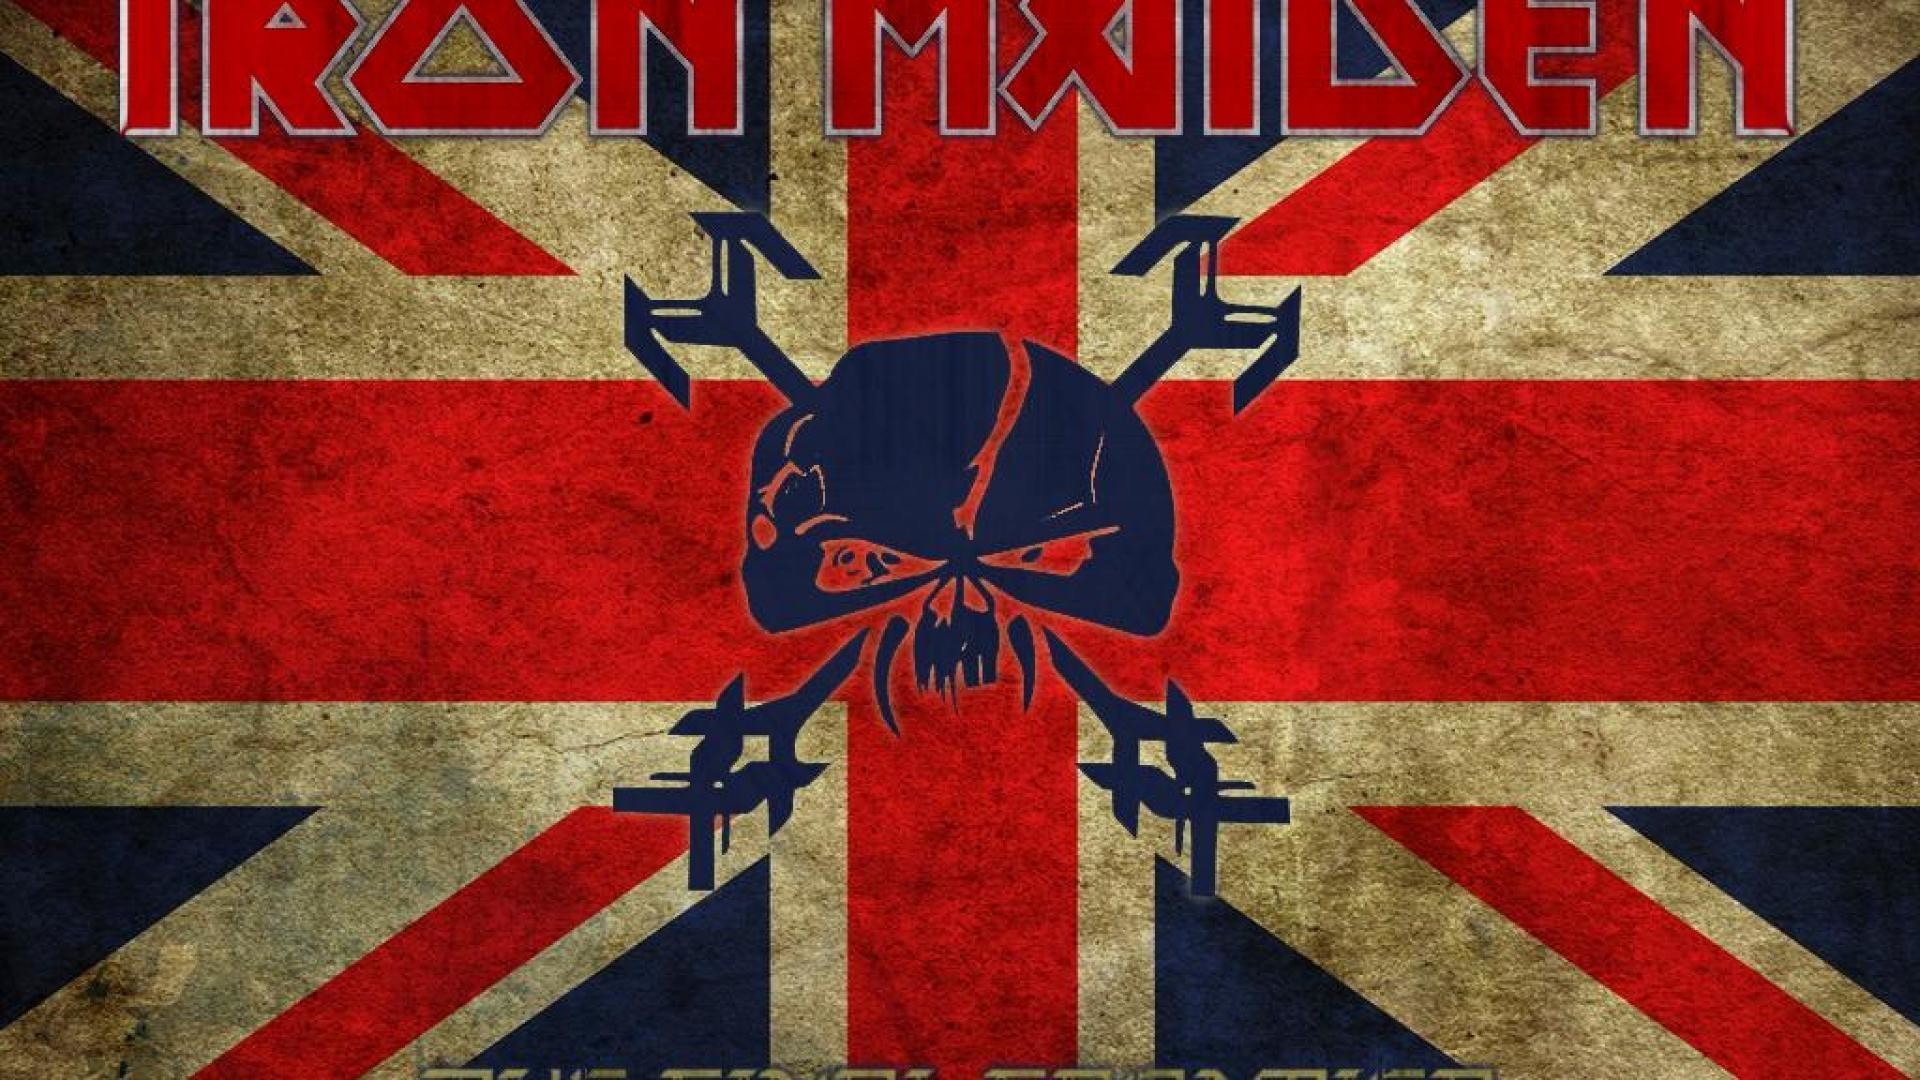 Iron Maiden Wallpaper 1920x1080 (79+ images)